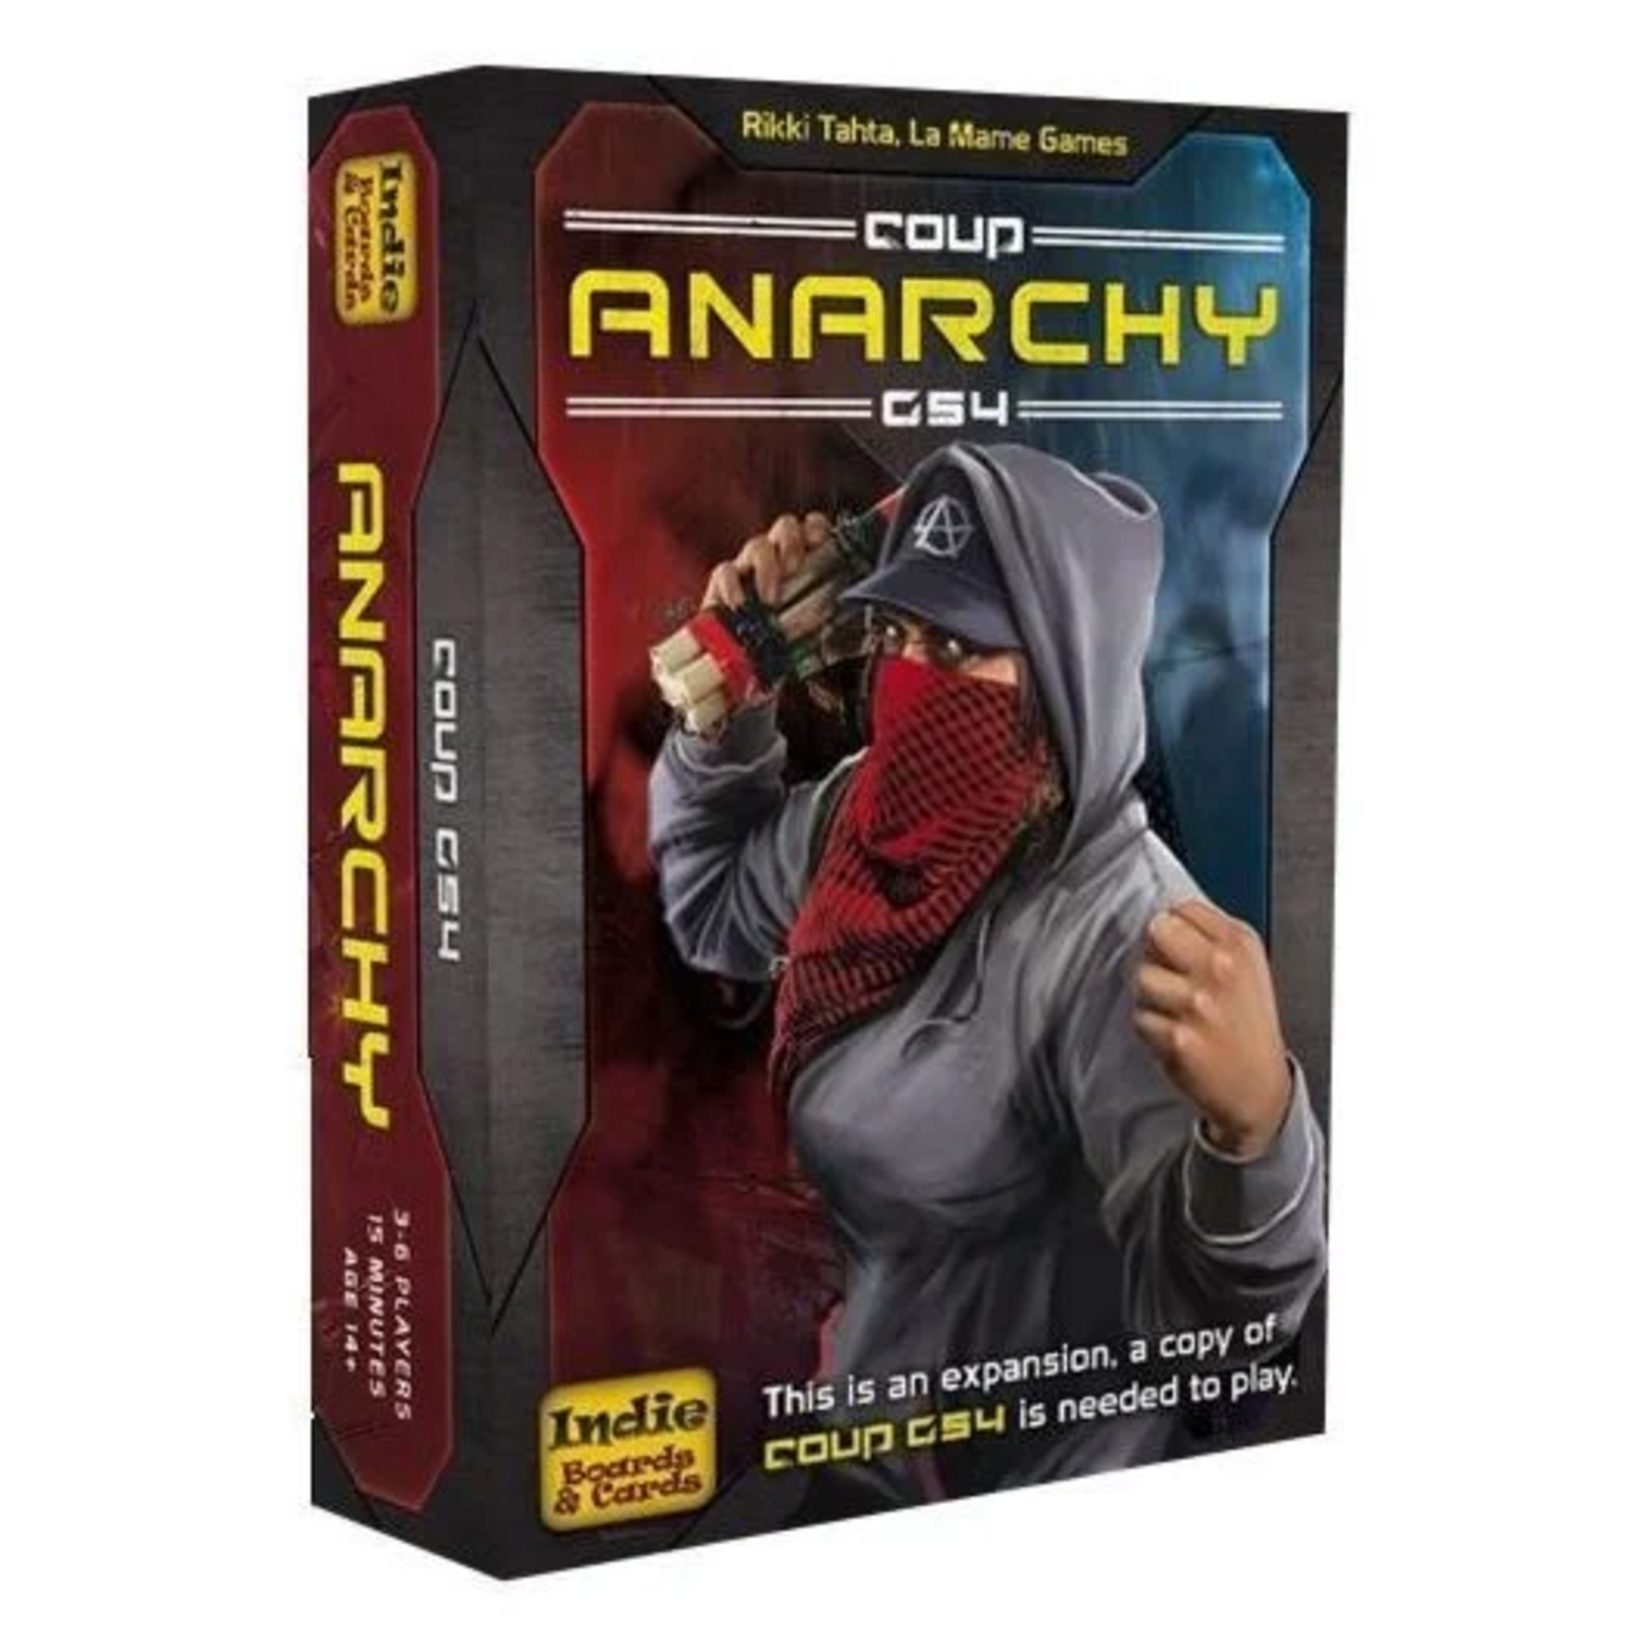 Indie Board and Card Coup Rebellion G54 Anarchy Expansion